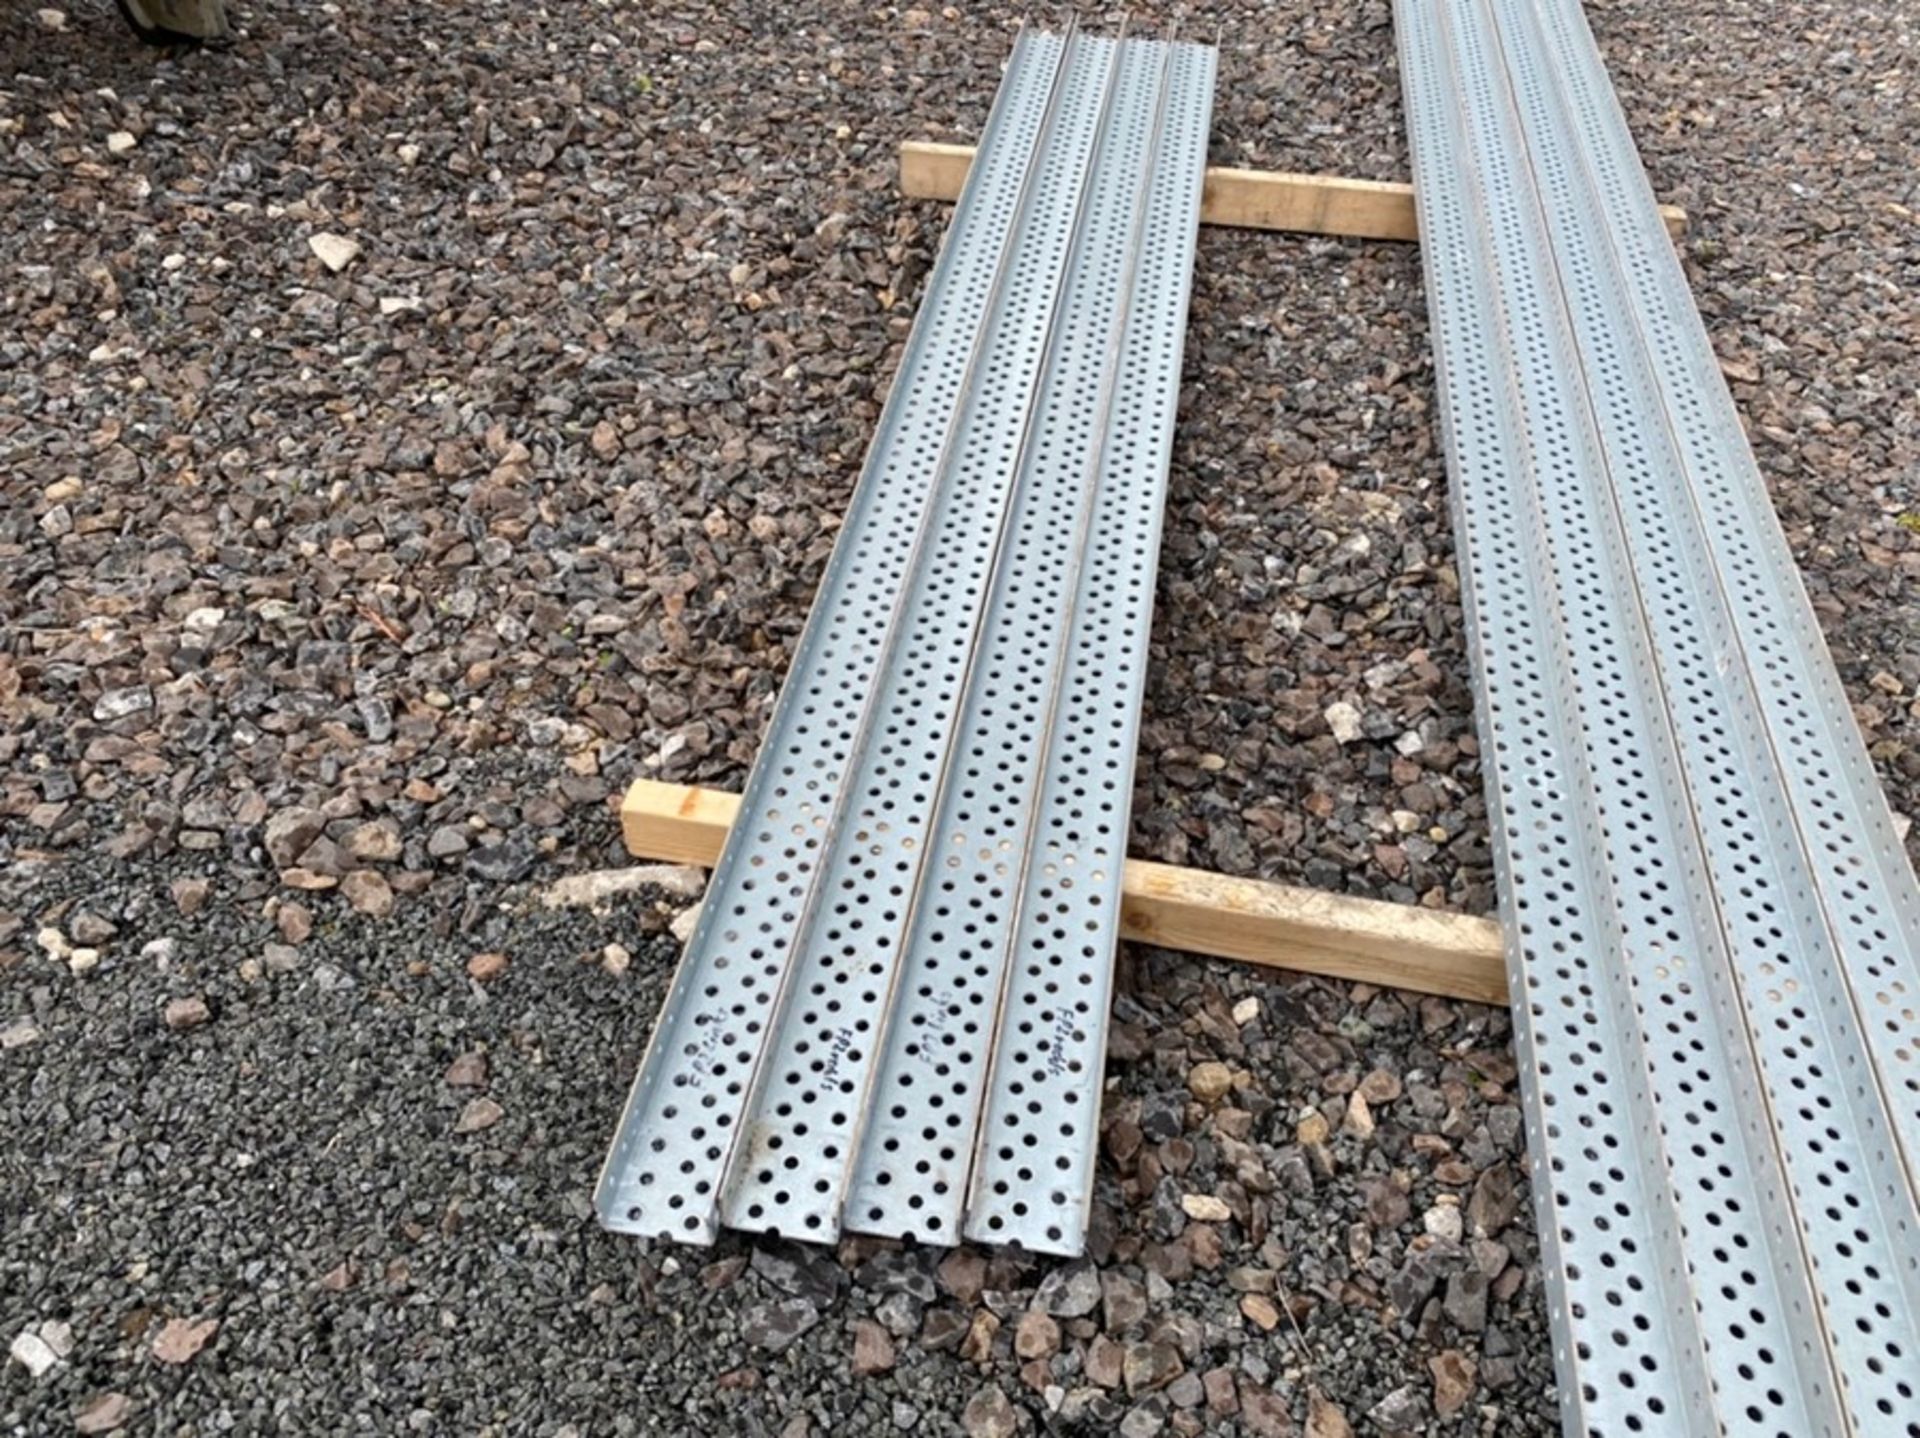 4 X 7FT LENGTHS OF GALVANISED STEEL CHANNEL 3”x1.5”